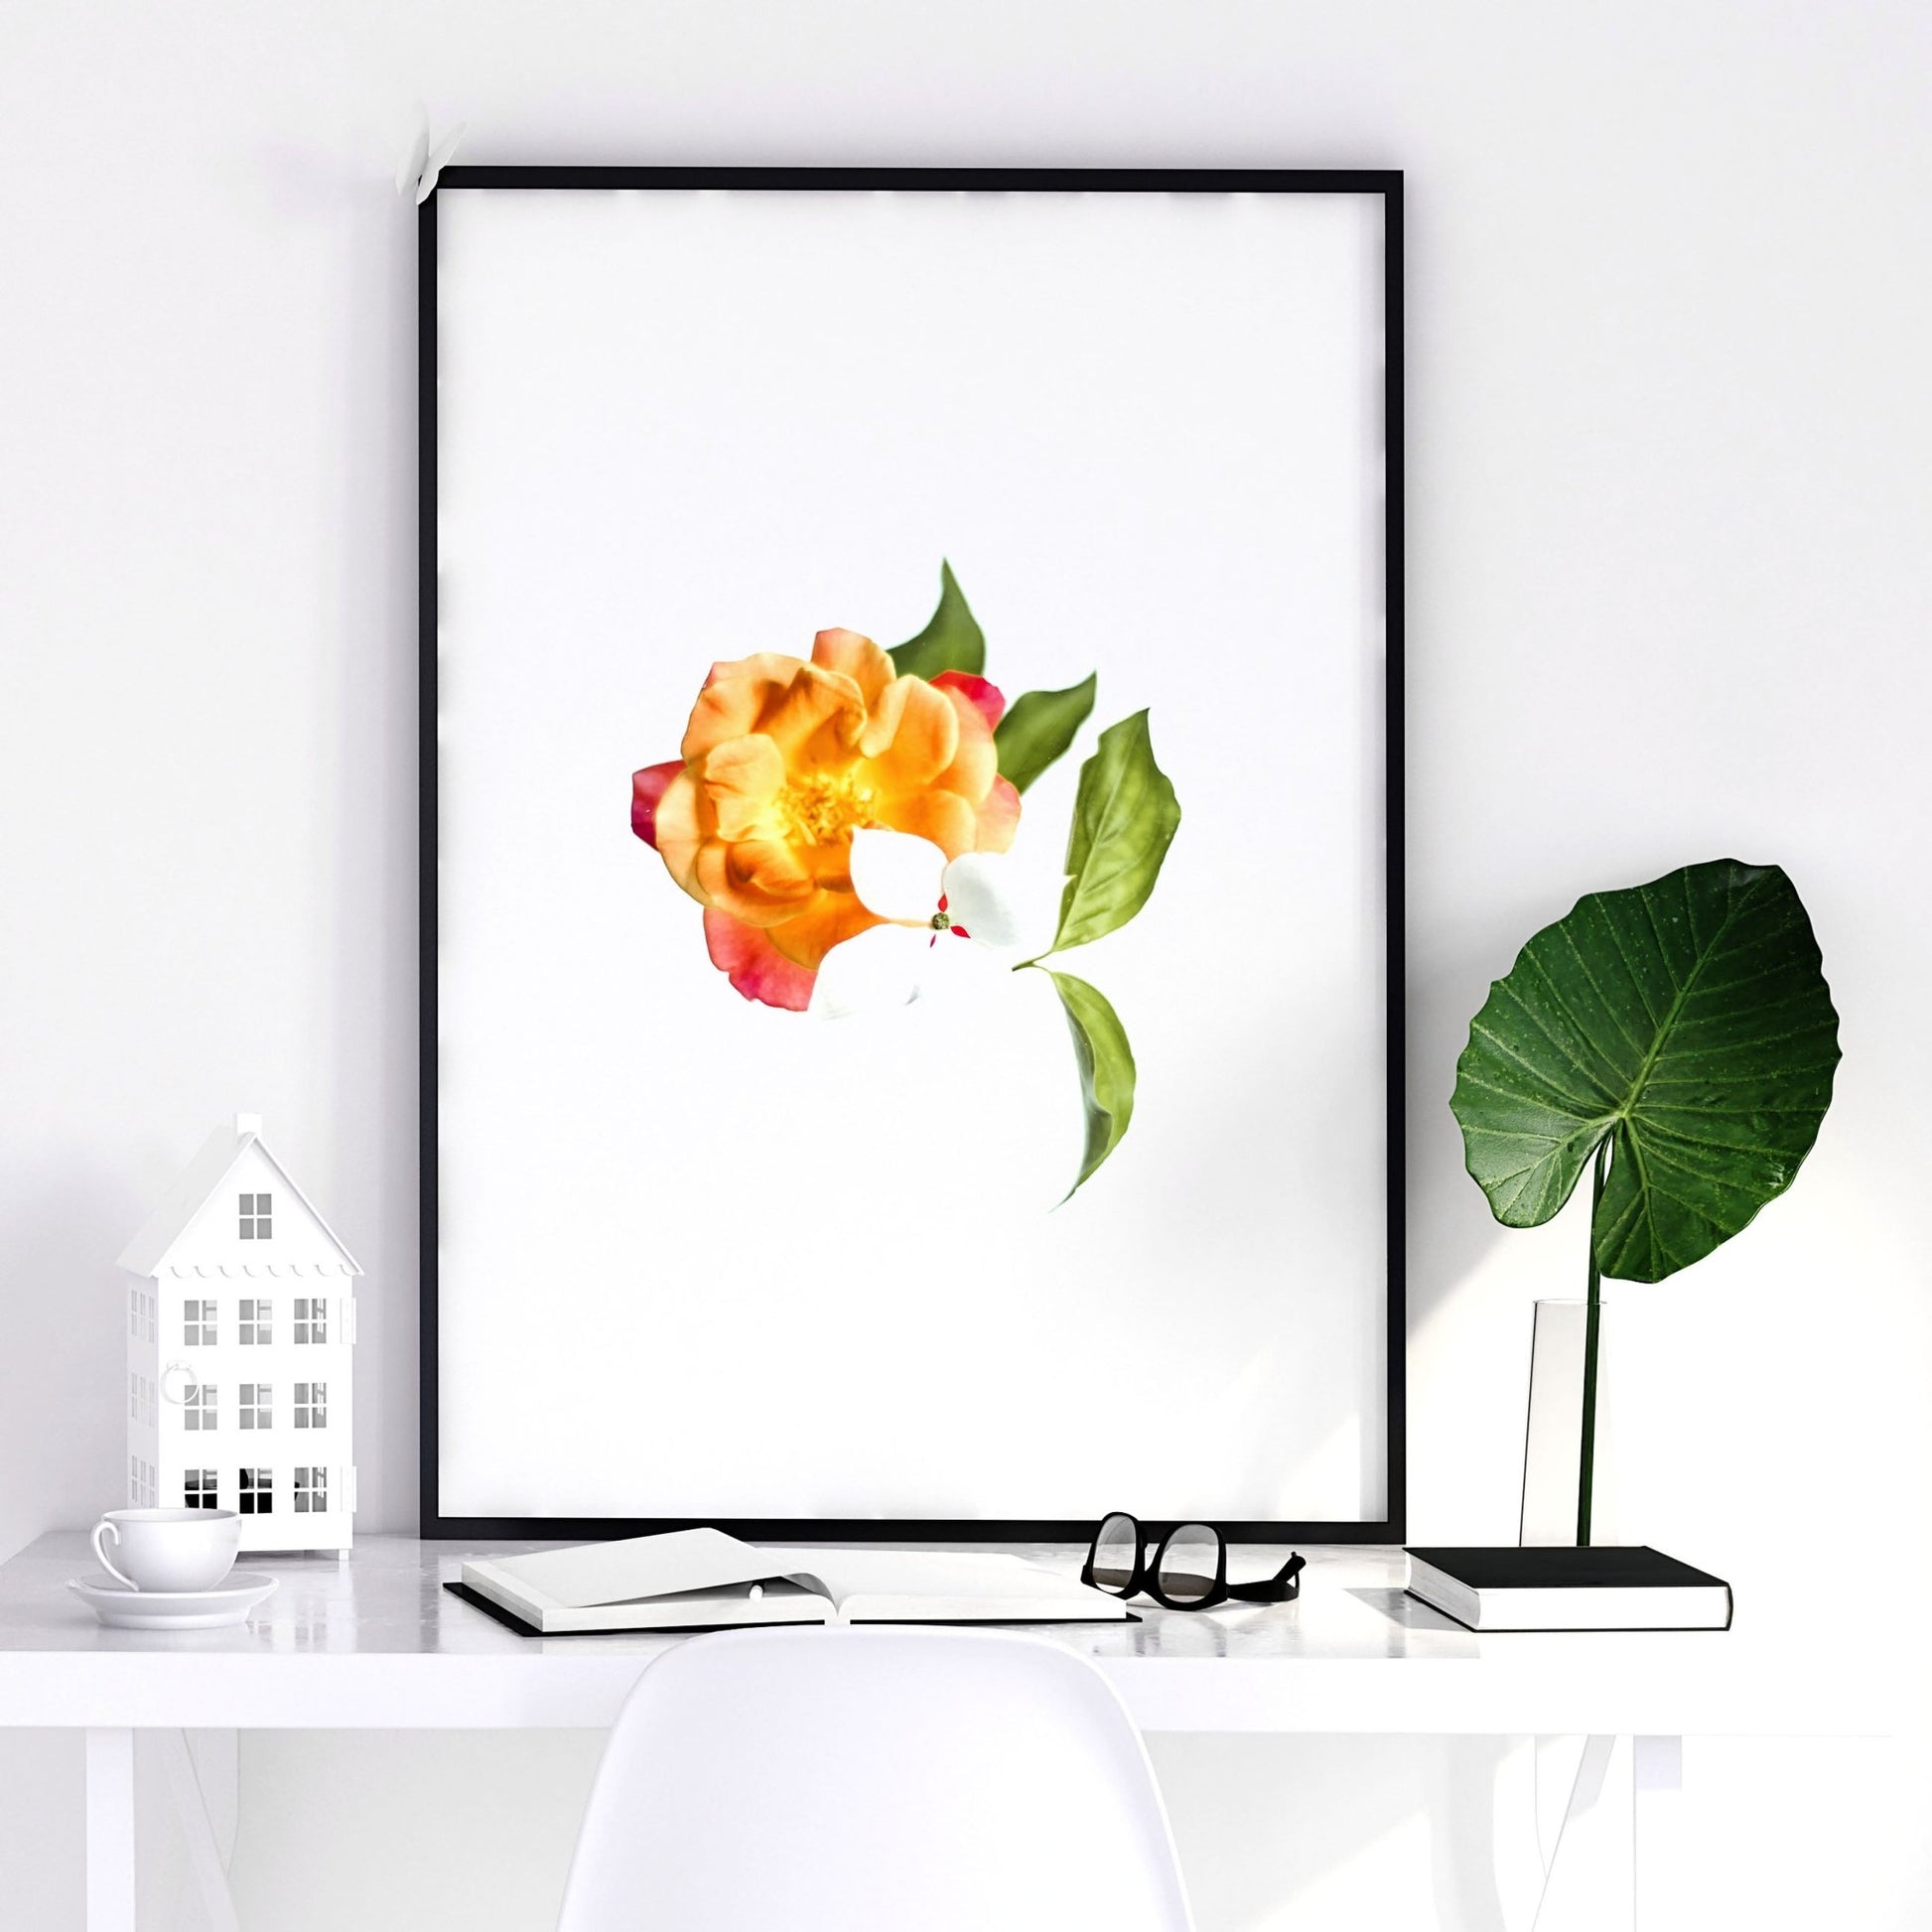 Bedroom pictures for walls | set of 3 art prints - About Wall Art